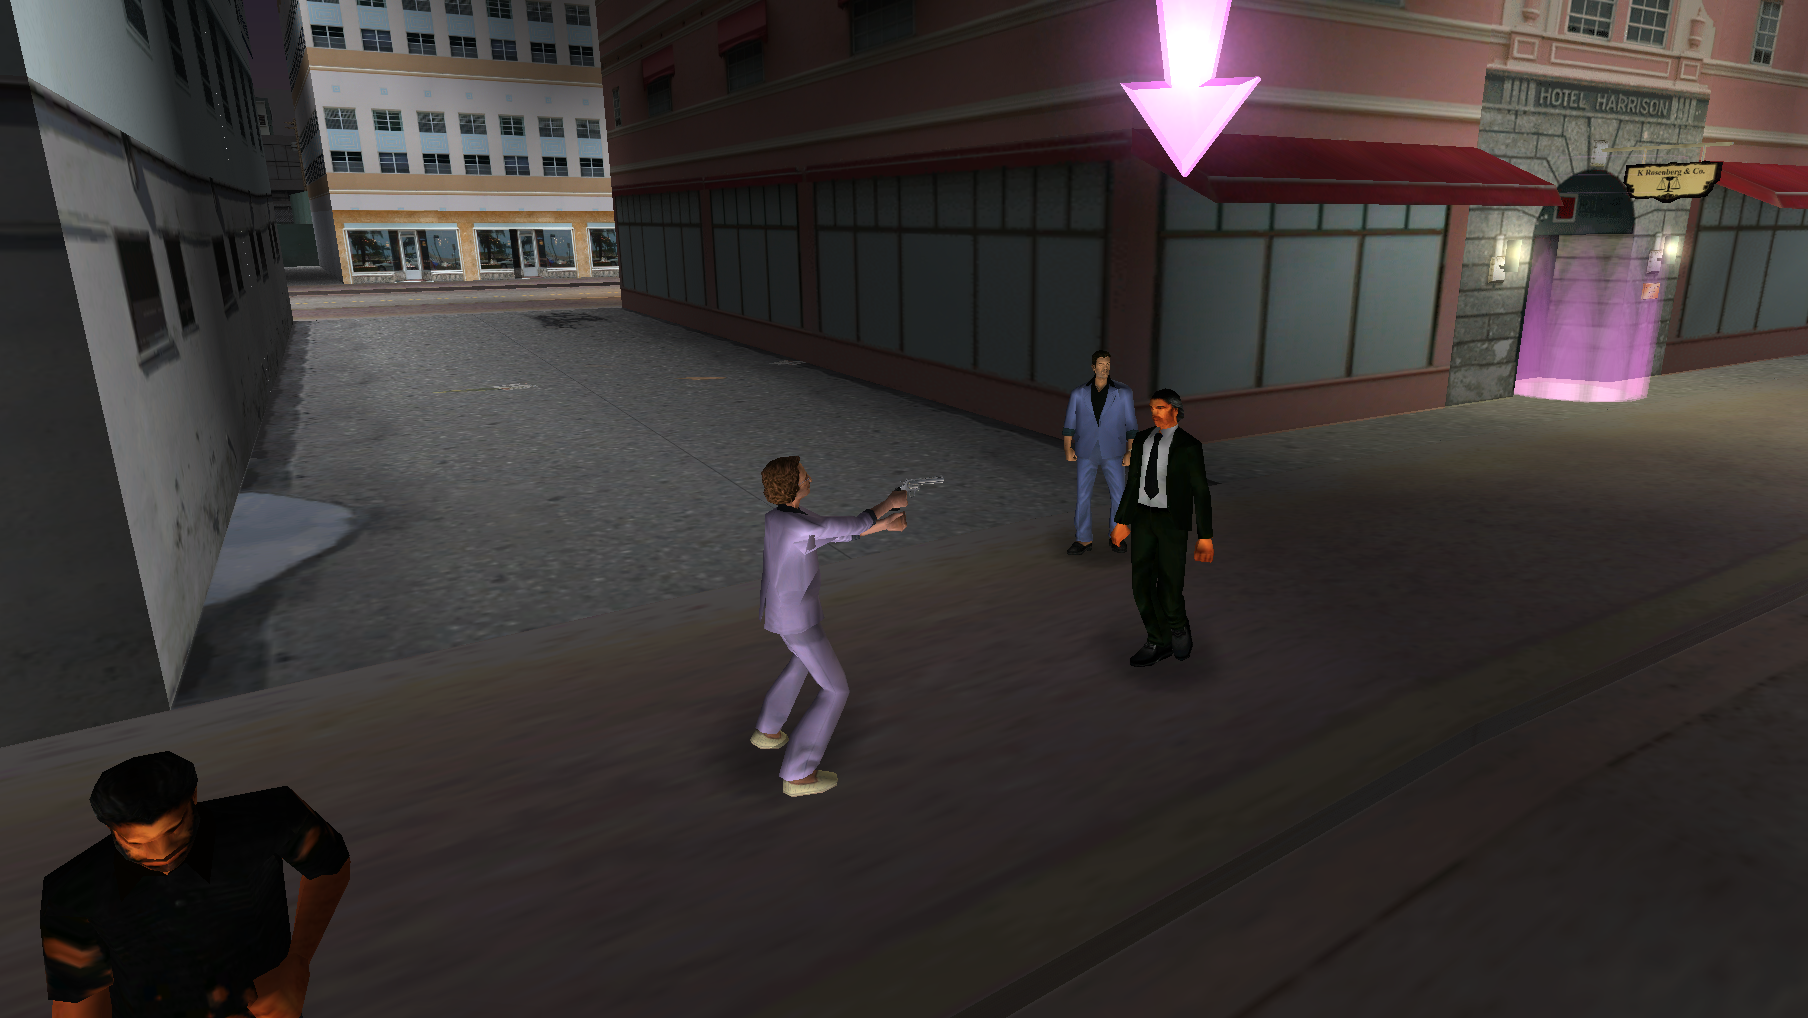 vc 2 players mod for grand theft auto vice city, image 2, image, screenshot...